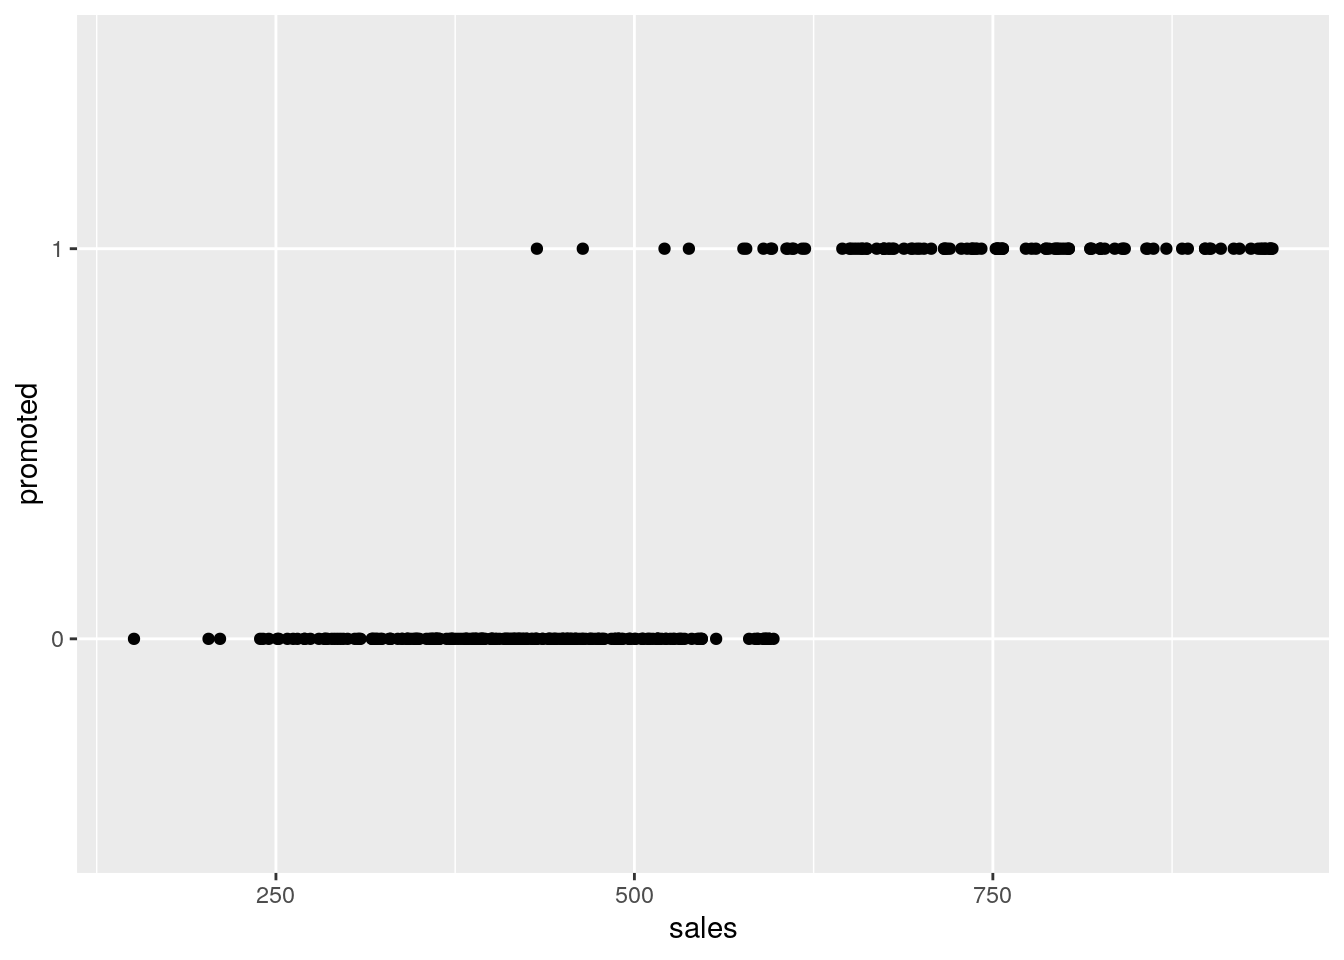 Plot of promotion against sales in the `salespeople` data set